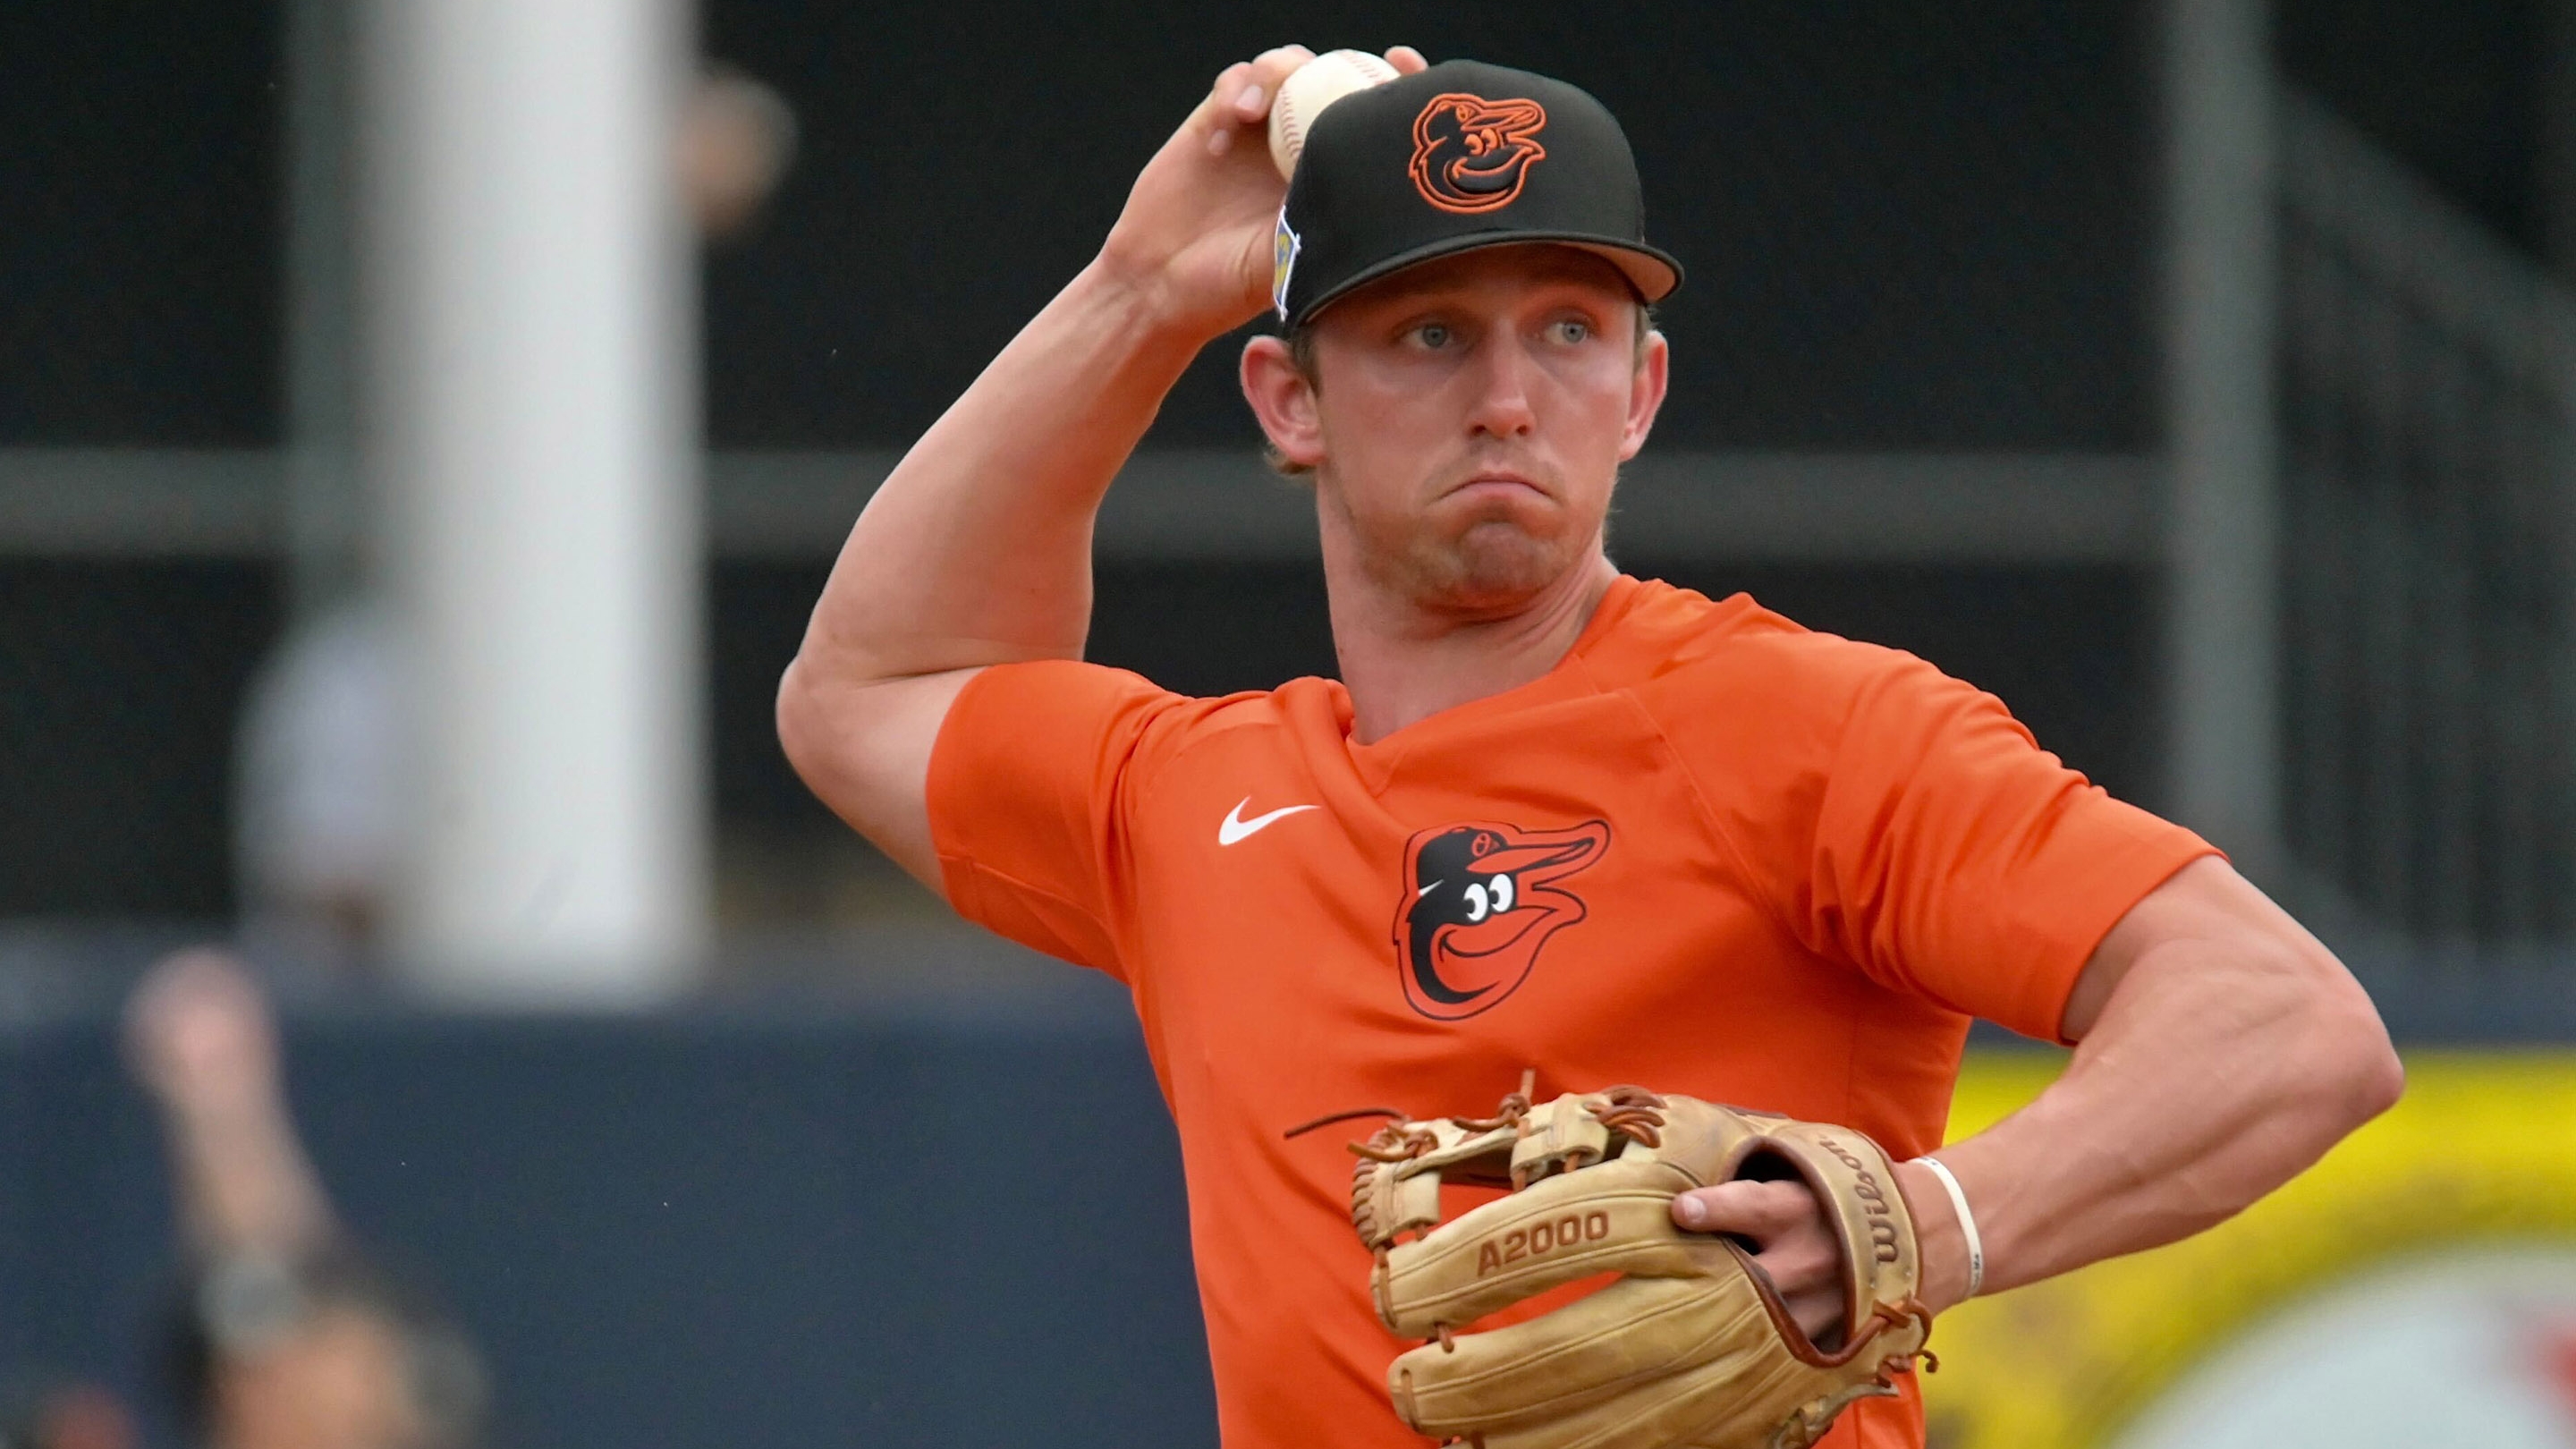 Orioles prospects will debut soon which could impact Adam Frazier